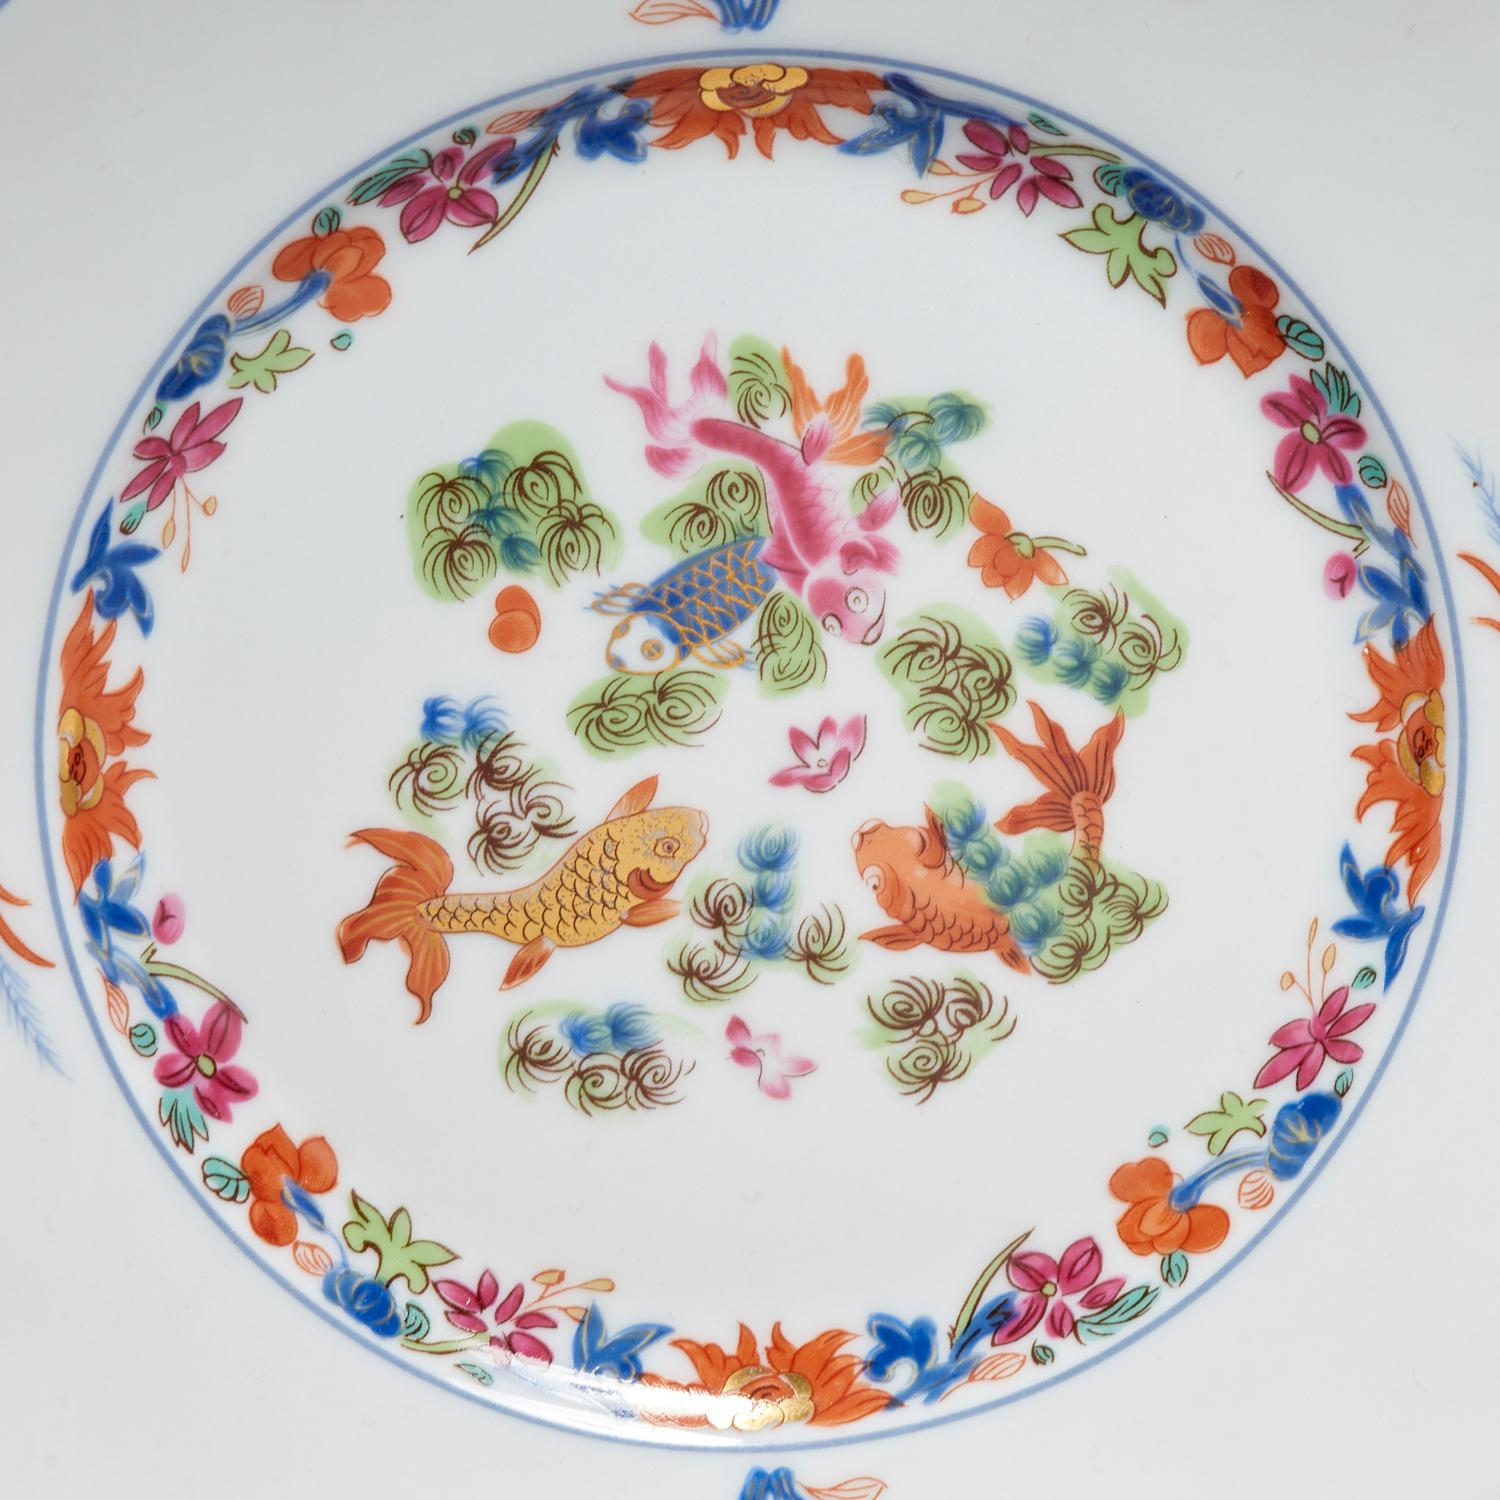 20th c., France, a magnificent Chinese-inspired service from the 18th century 